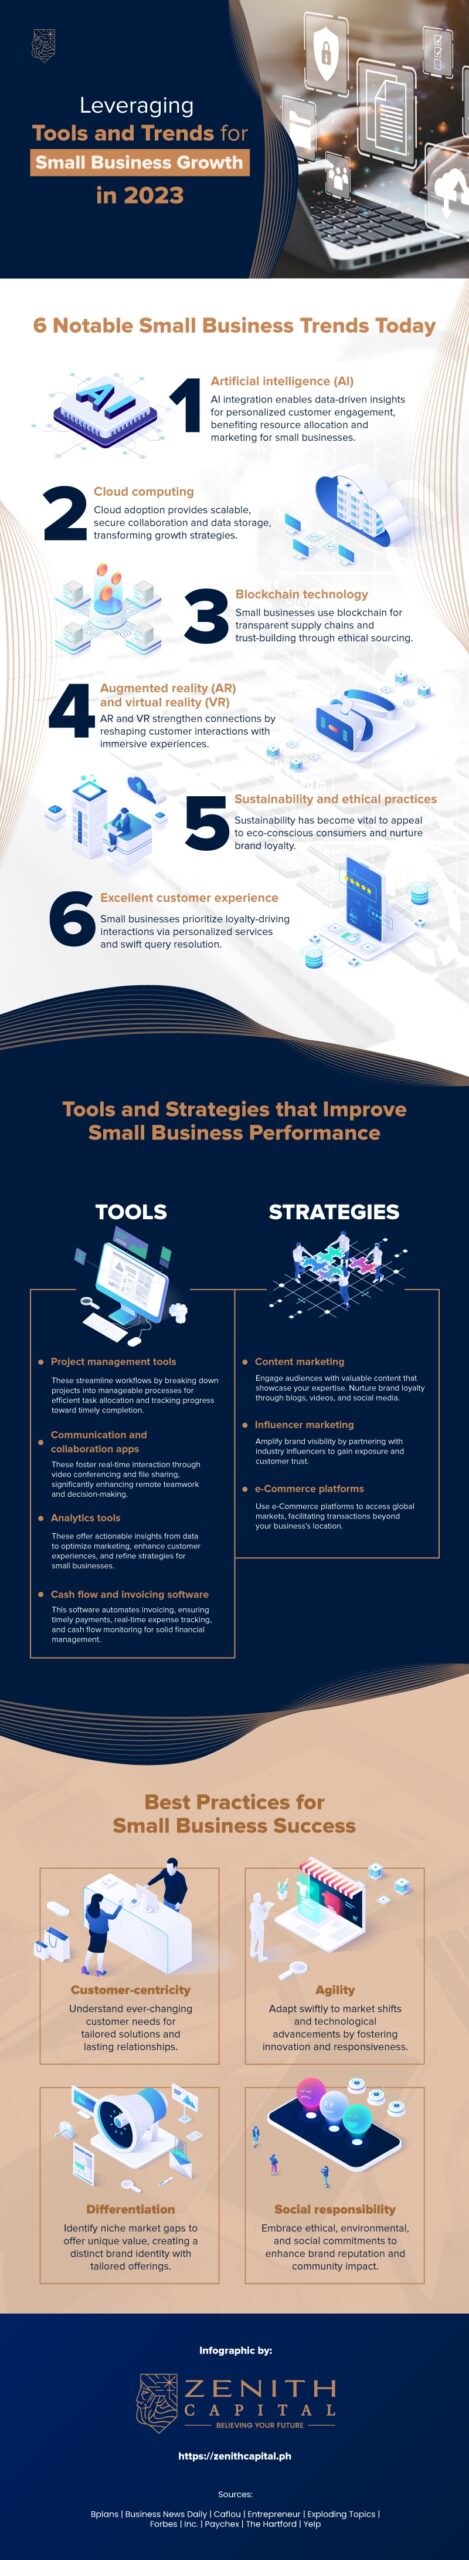 infographic by zenith capital on Leveraging Tools and Trends for Small Business Growth in 2023 